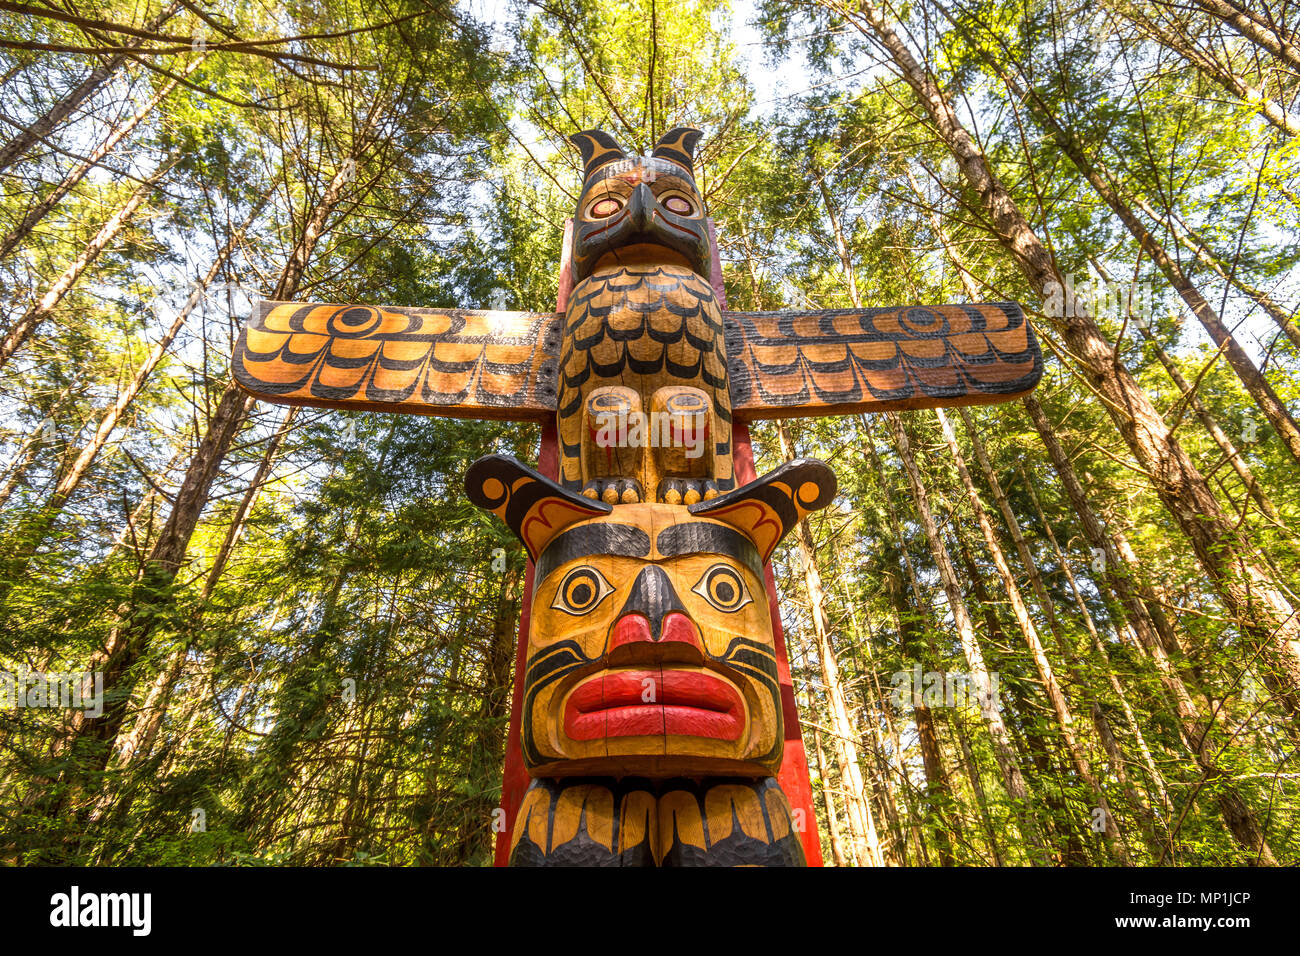 Native Canadian totem, Helliwell Provincial Park, Hornby Island, BC, Canada. Stock Photo